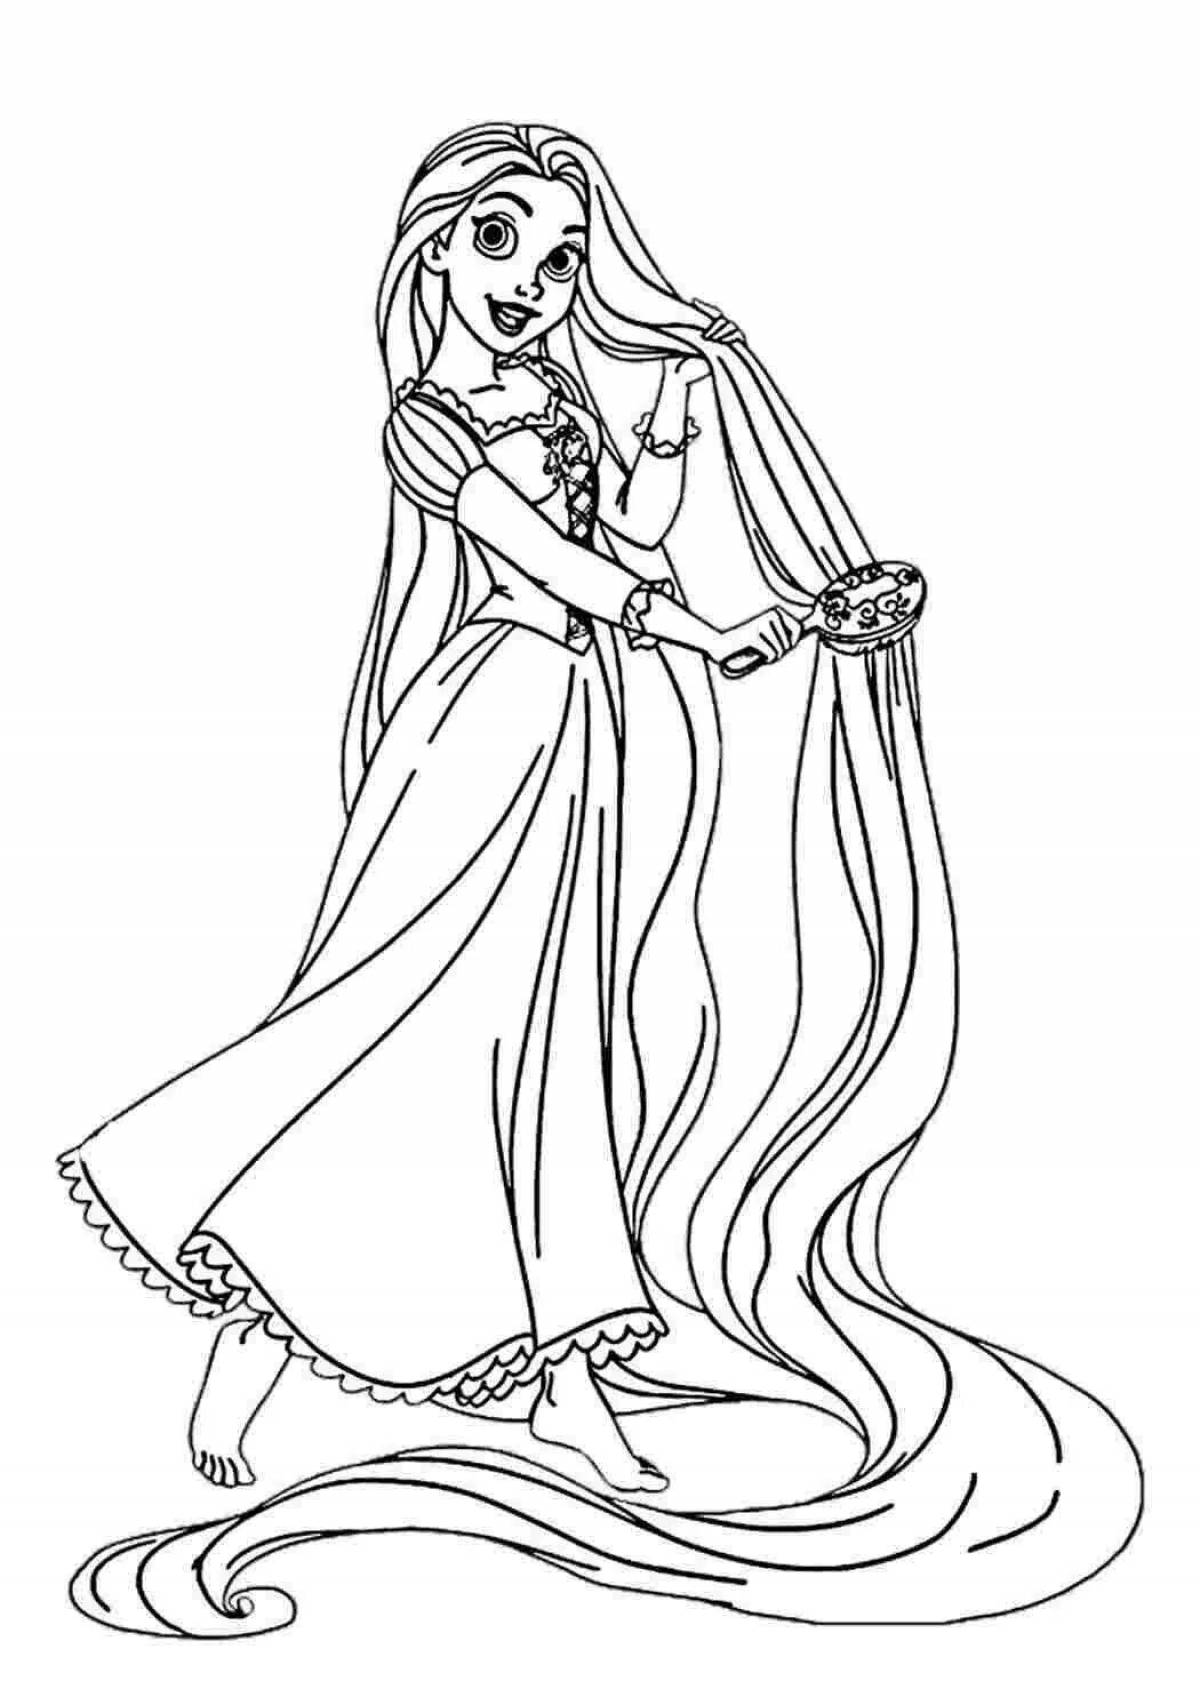 Coloring exotic long-haired princess